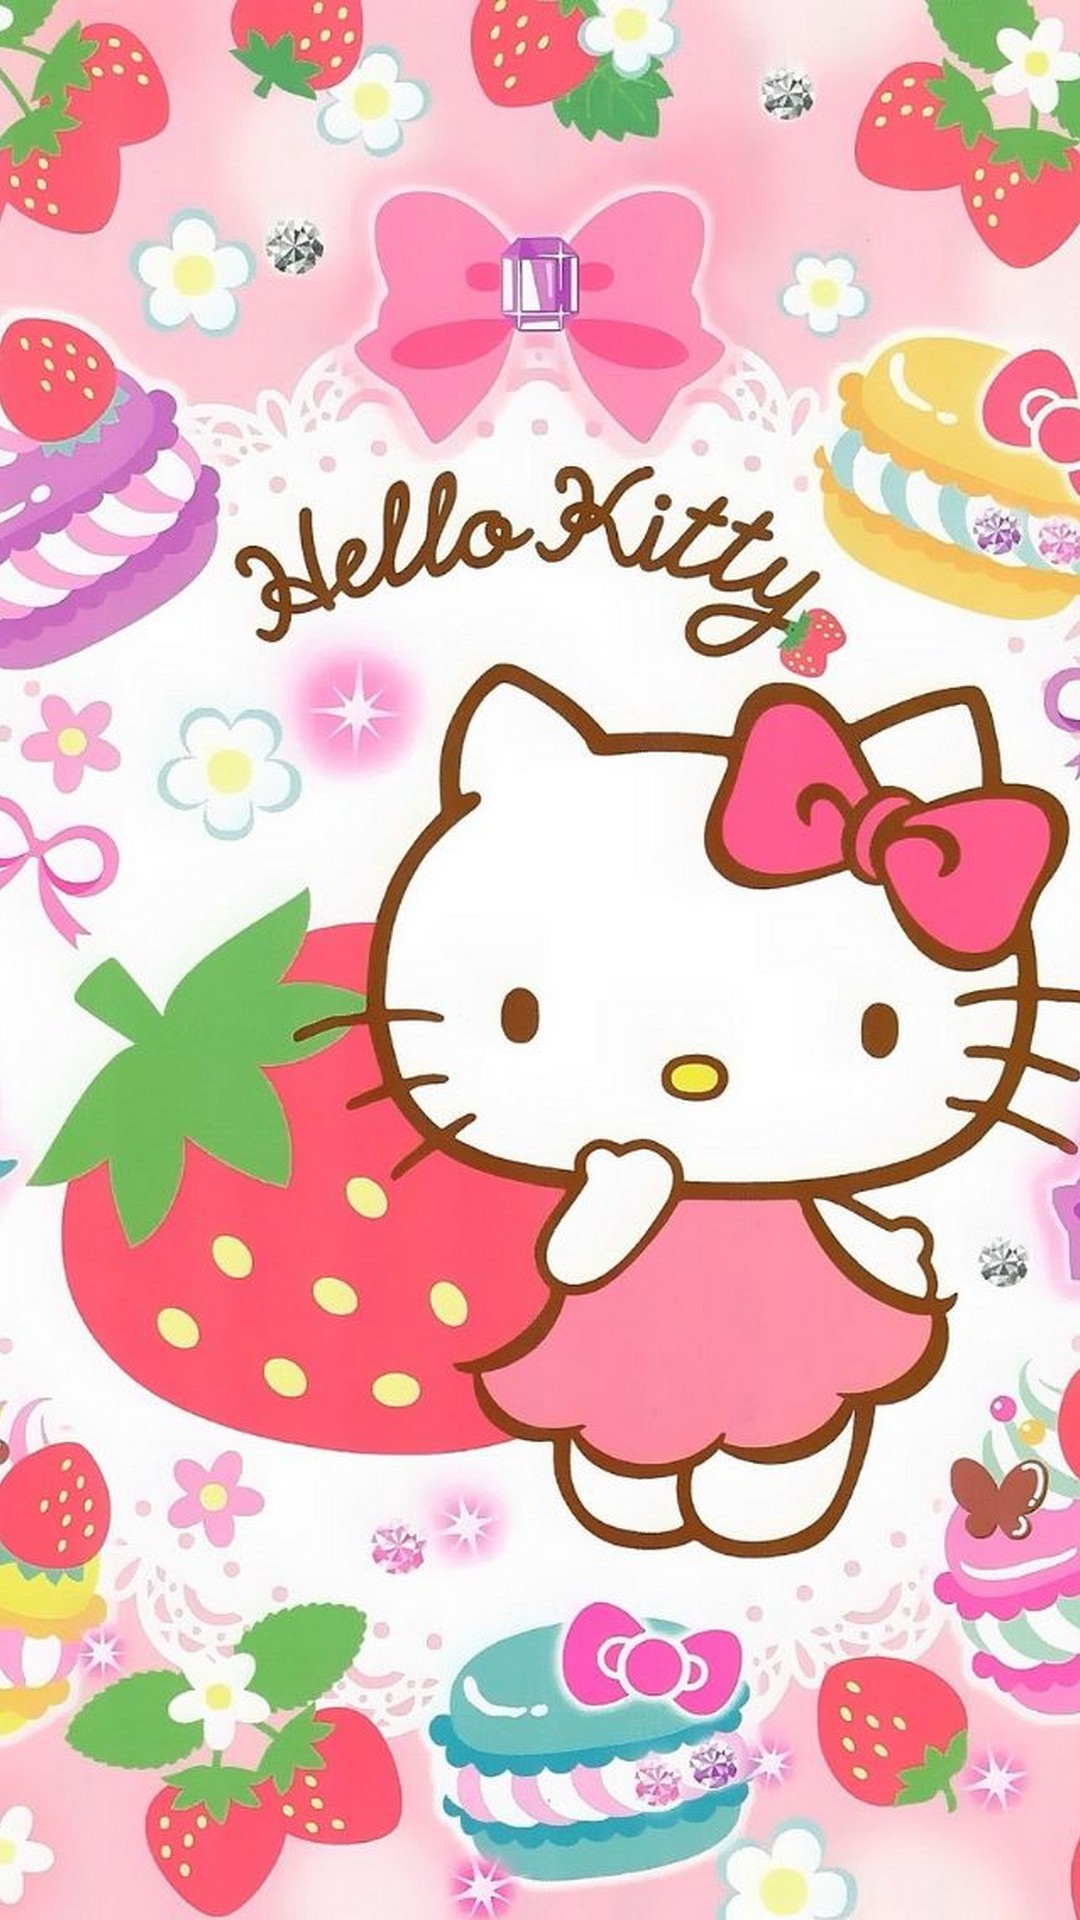 Hello Kitty Images Android Wallpaper with resolution 1080X1920 pixel. You can make this wallpaper for your Android backgrounds, Tablet, Smartphones Screensavers and Mobile Phone Lock Screen